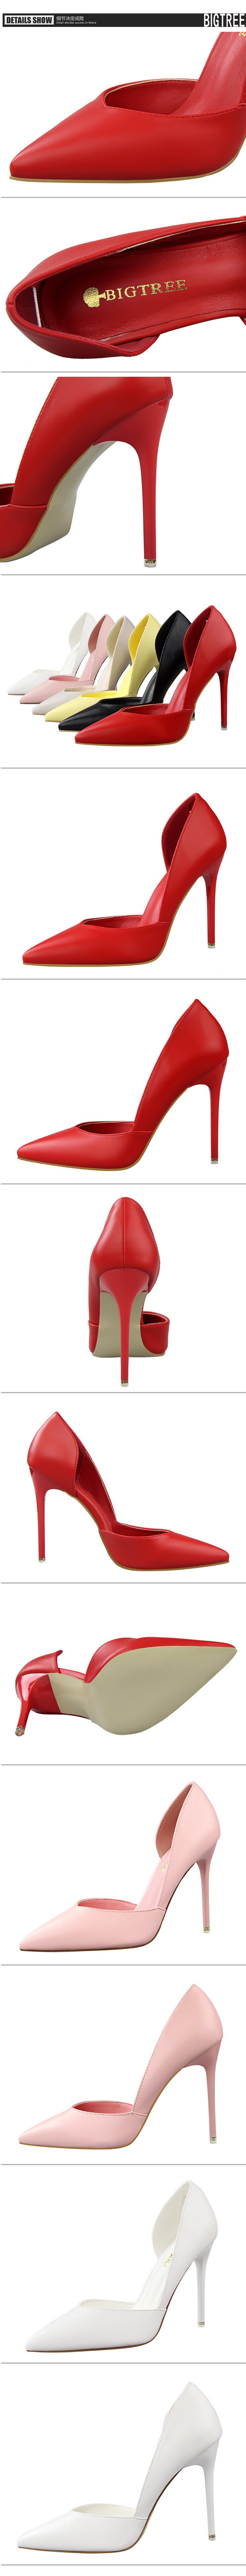 Fashion High Heels Red Yellow Black Heels 2021 Spring Woman Pumps Stiletto Heels Office Shoes Pointed Toe Women Heels 10.5 Cm